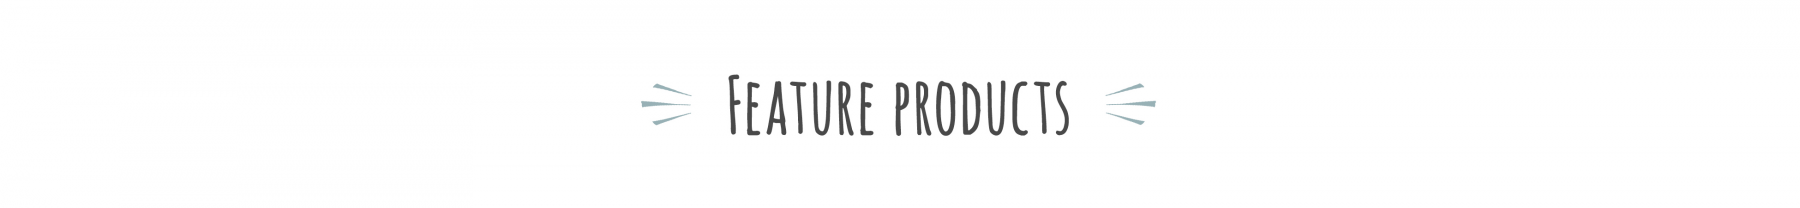 TITLE - Featured Products.png